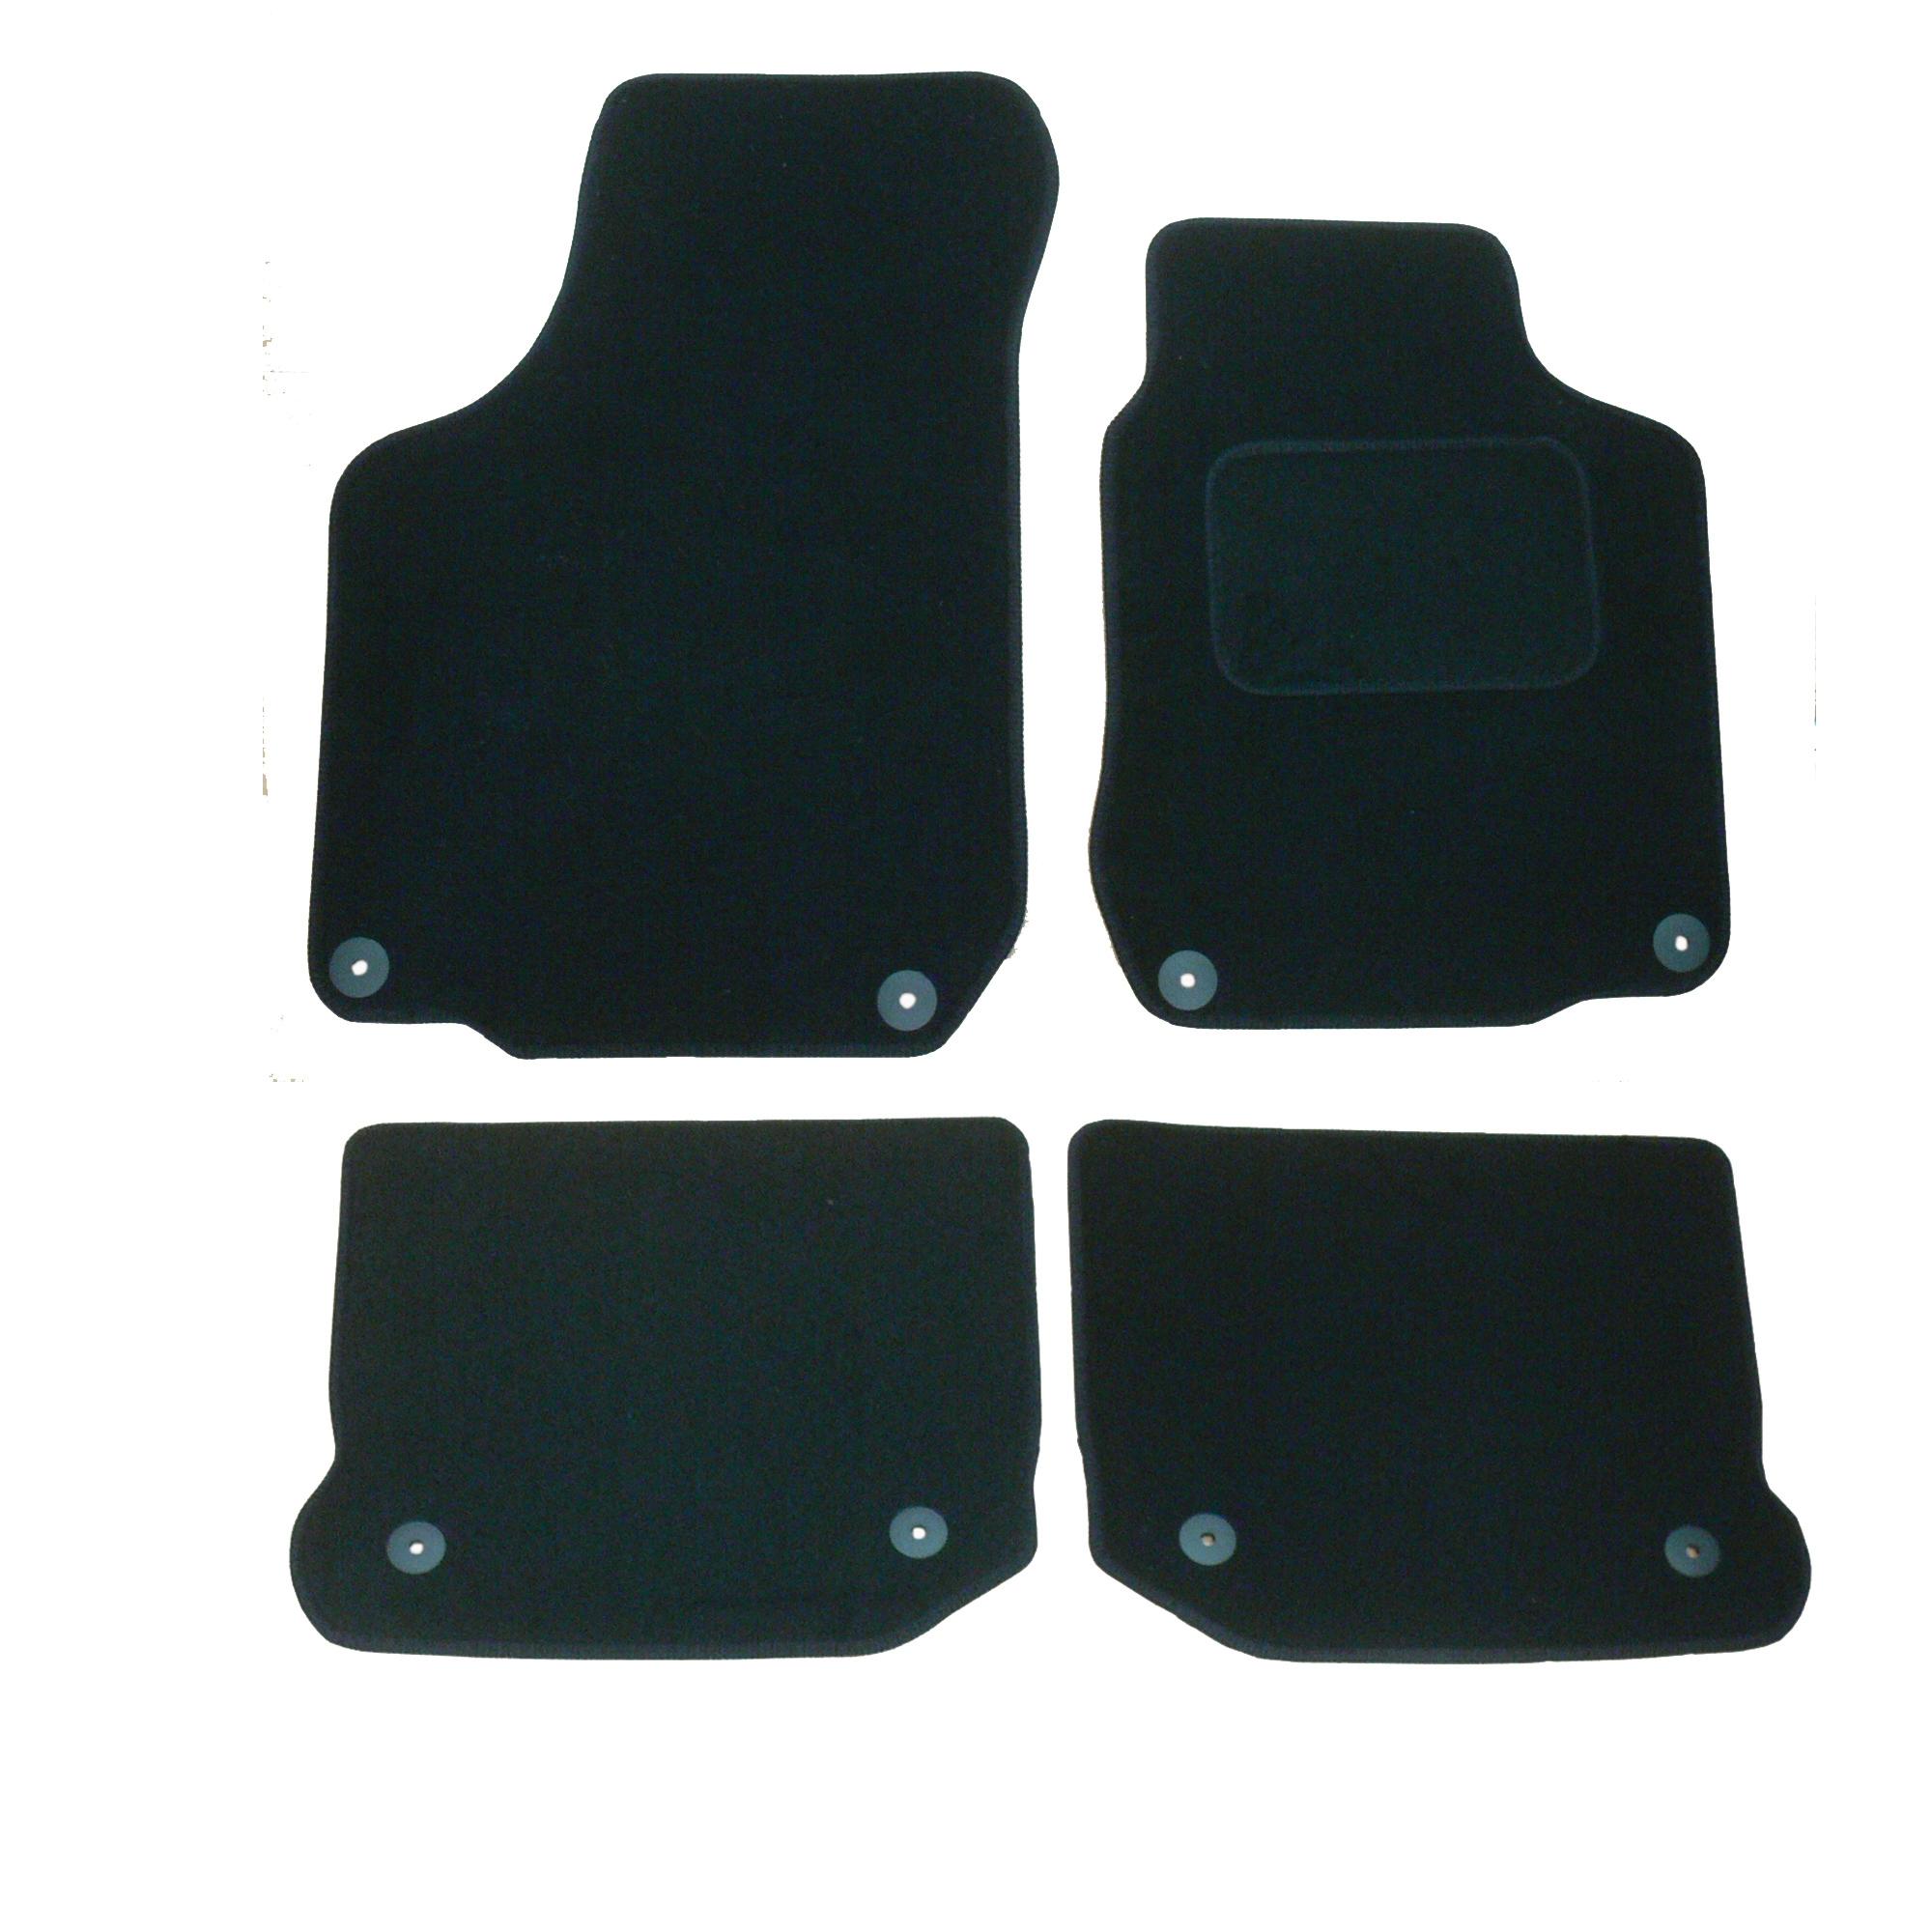 Part No: 1086 Ford Focus Tailored Car Mats 1998-04